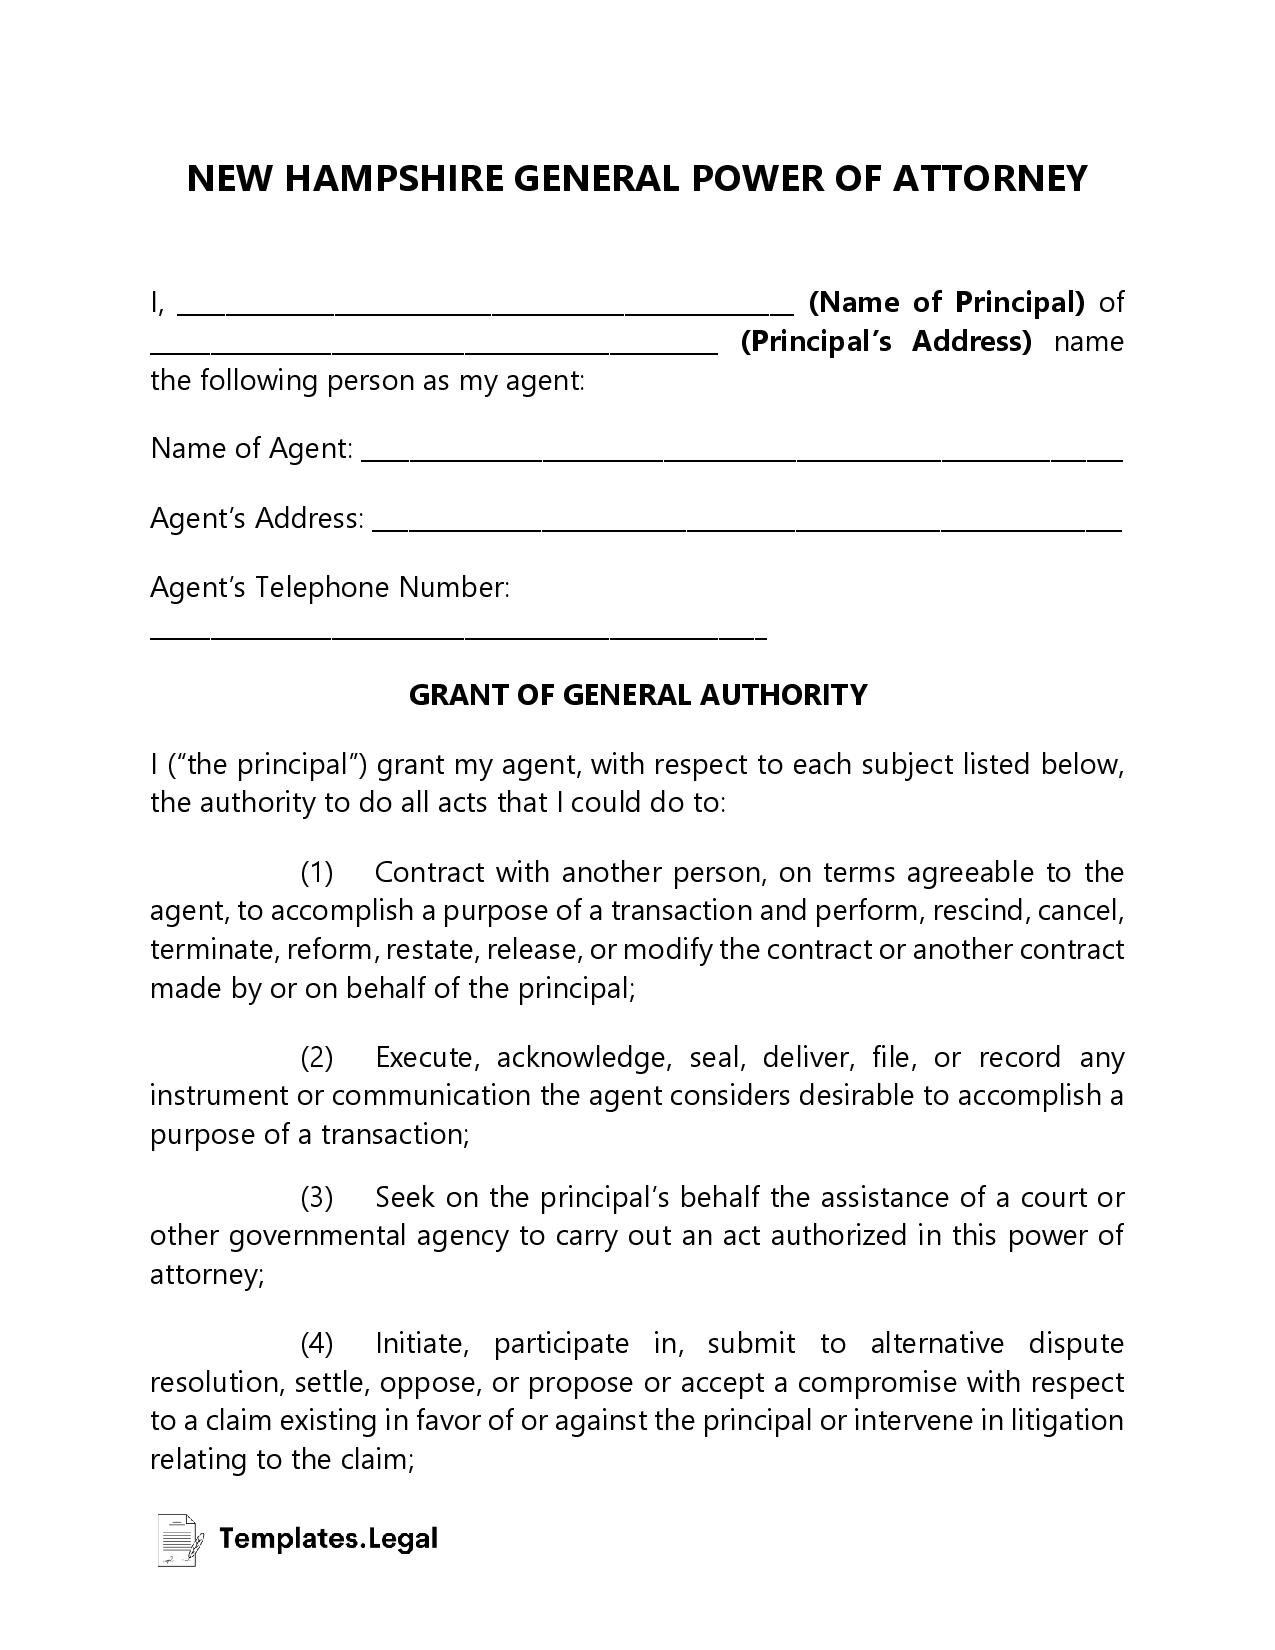 New Hampshire General Power of Attorney - Templates.Legal